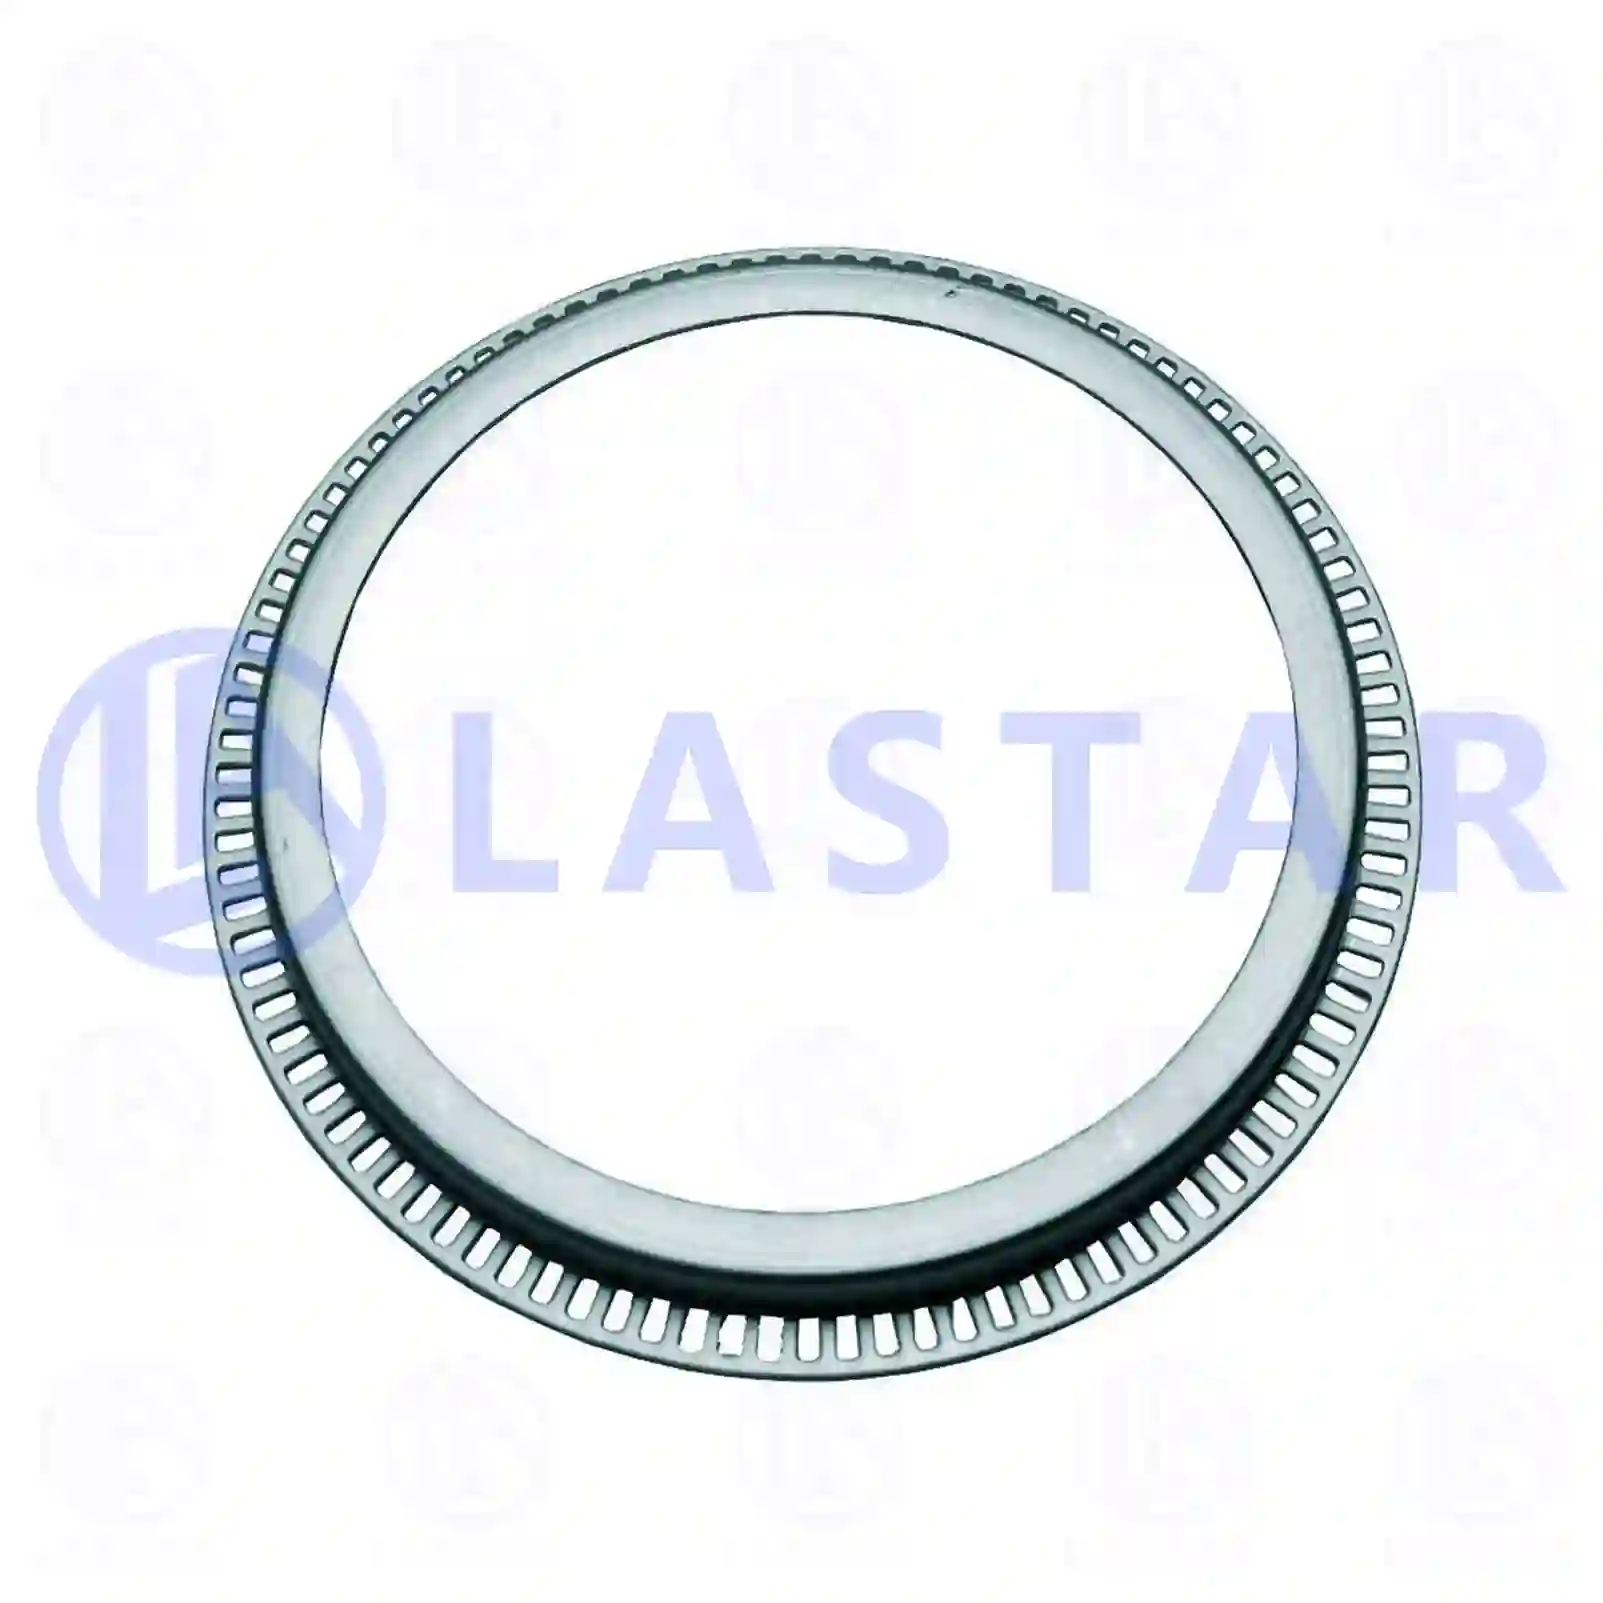 ABS ring, 77726198, 9423560015, 9423560315, 9423560715, ZG50008-0008 ||  77726198 Lastar Spare Part | Truck Spare Parts, Auotomotive Spare Parts ABS ring, 77726198, 9423560015, 9423560315, 9423560715, ZG50008-0008 ||  77726198 Lastar Spare Part | Truck Spare Parts, Auotomotive Spare Parts